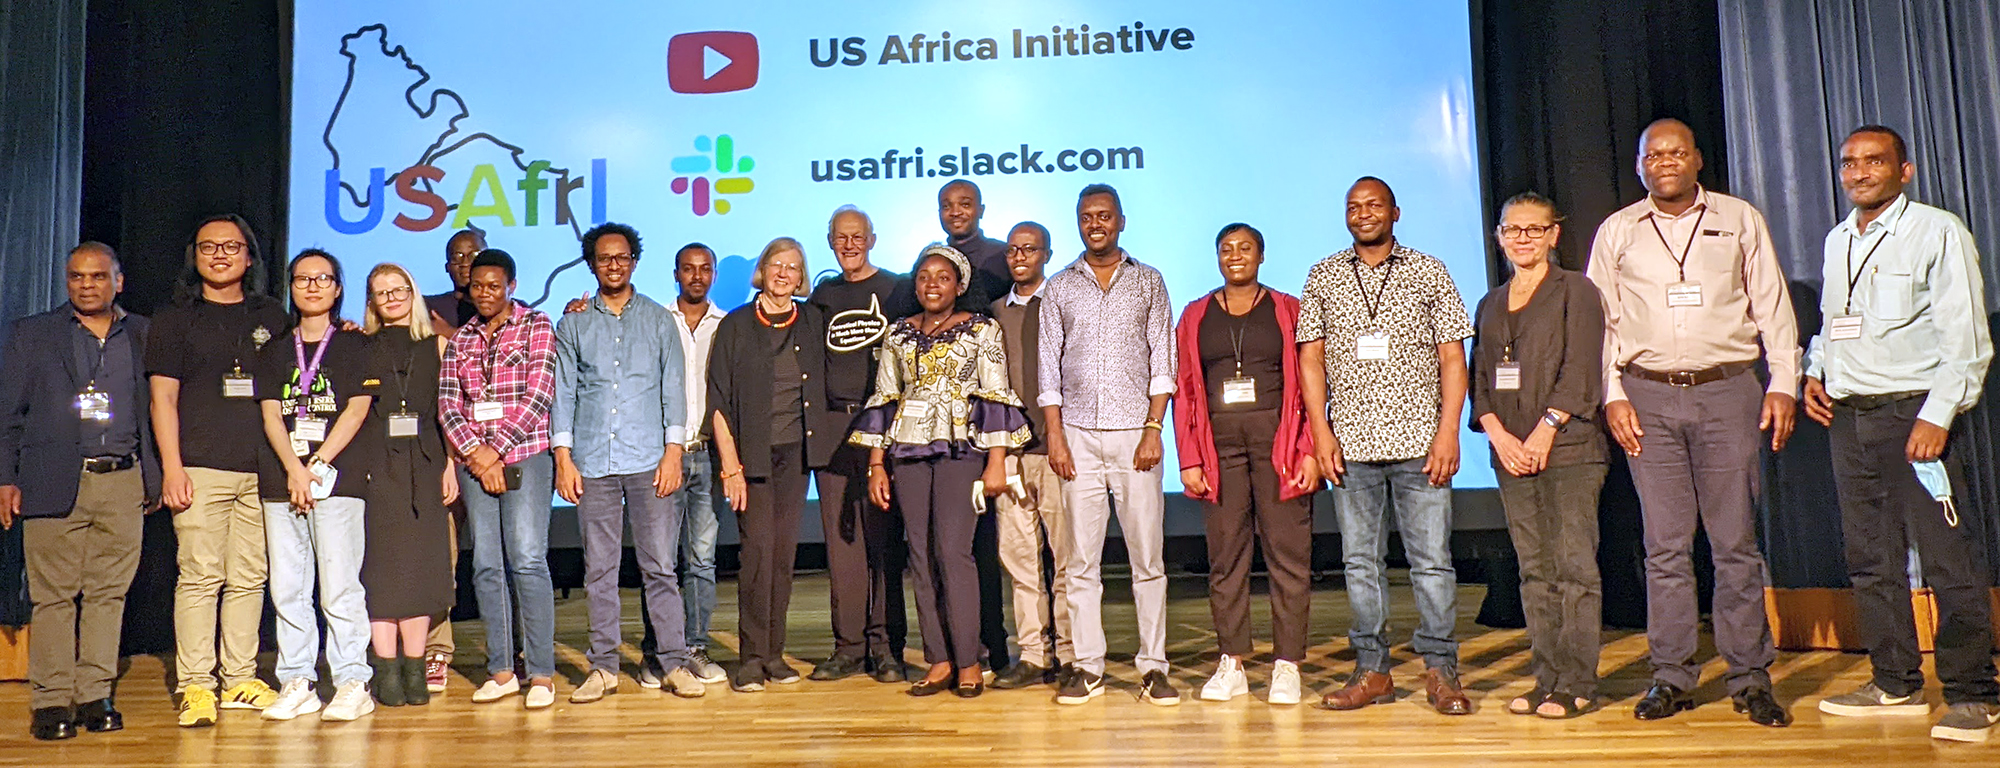 2022 Electronic Structure Workshop Group Photo of Visiting Researchers on Stage with USAfrI Organizers